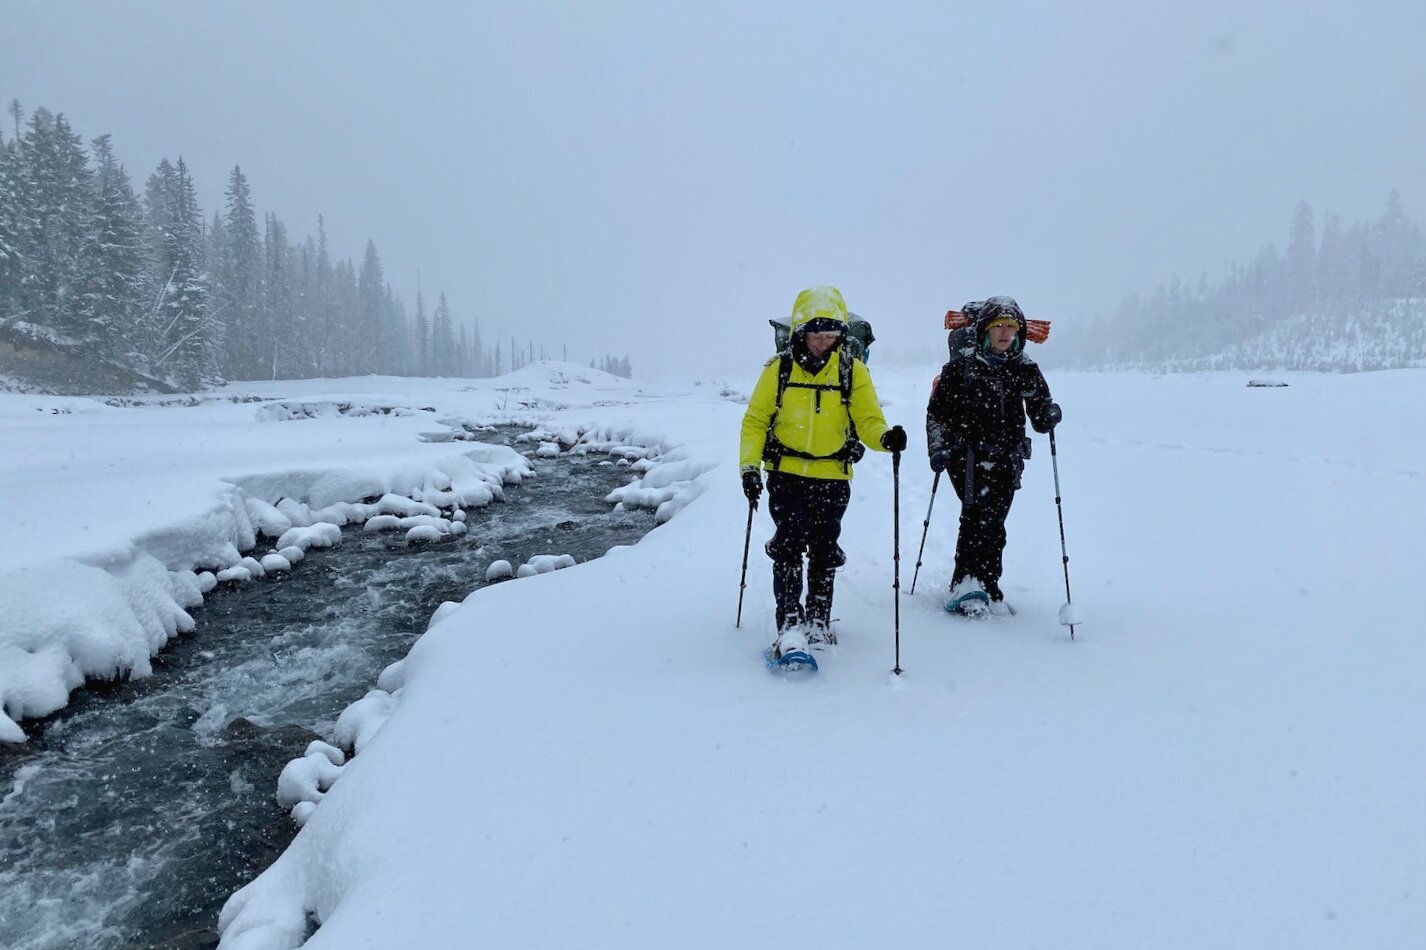 Snowshoeing with a backpack on is a ton of fun, but it saps energy quickly, so keep mileage goals short.